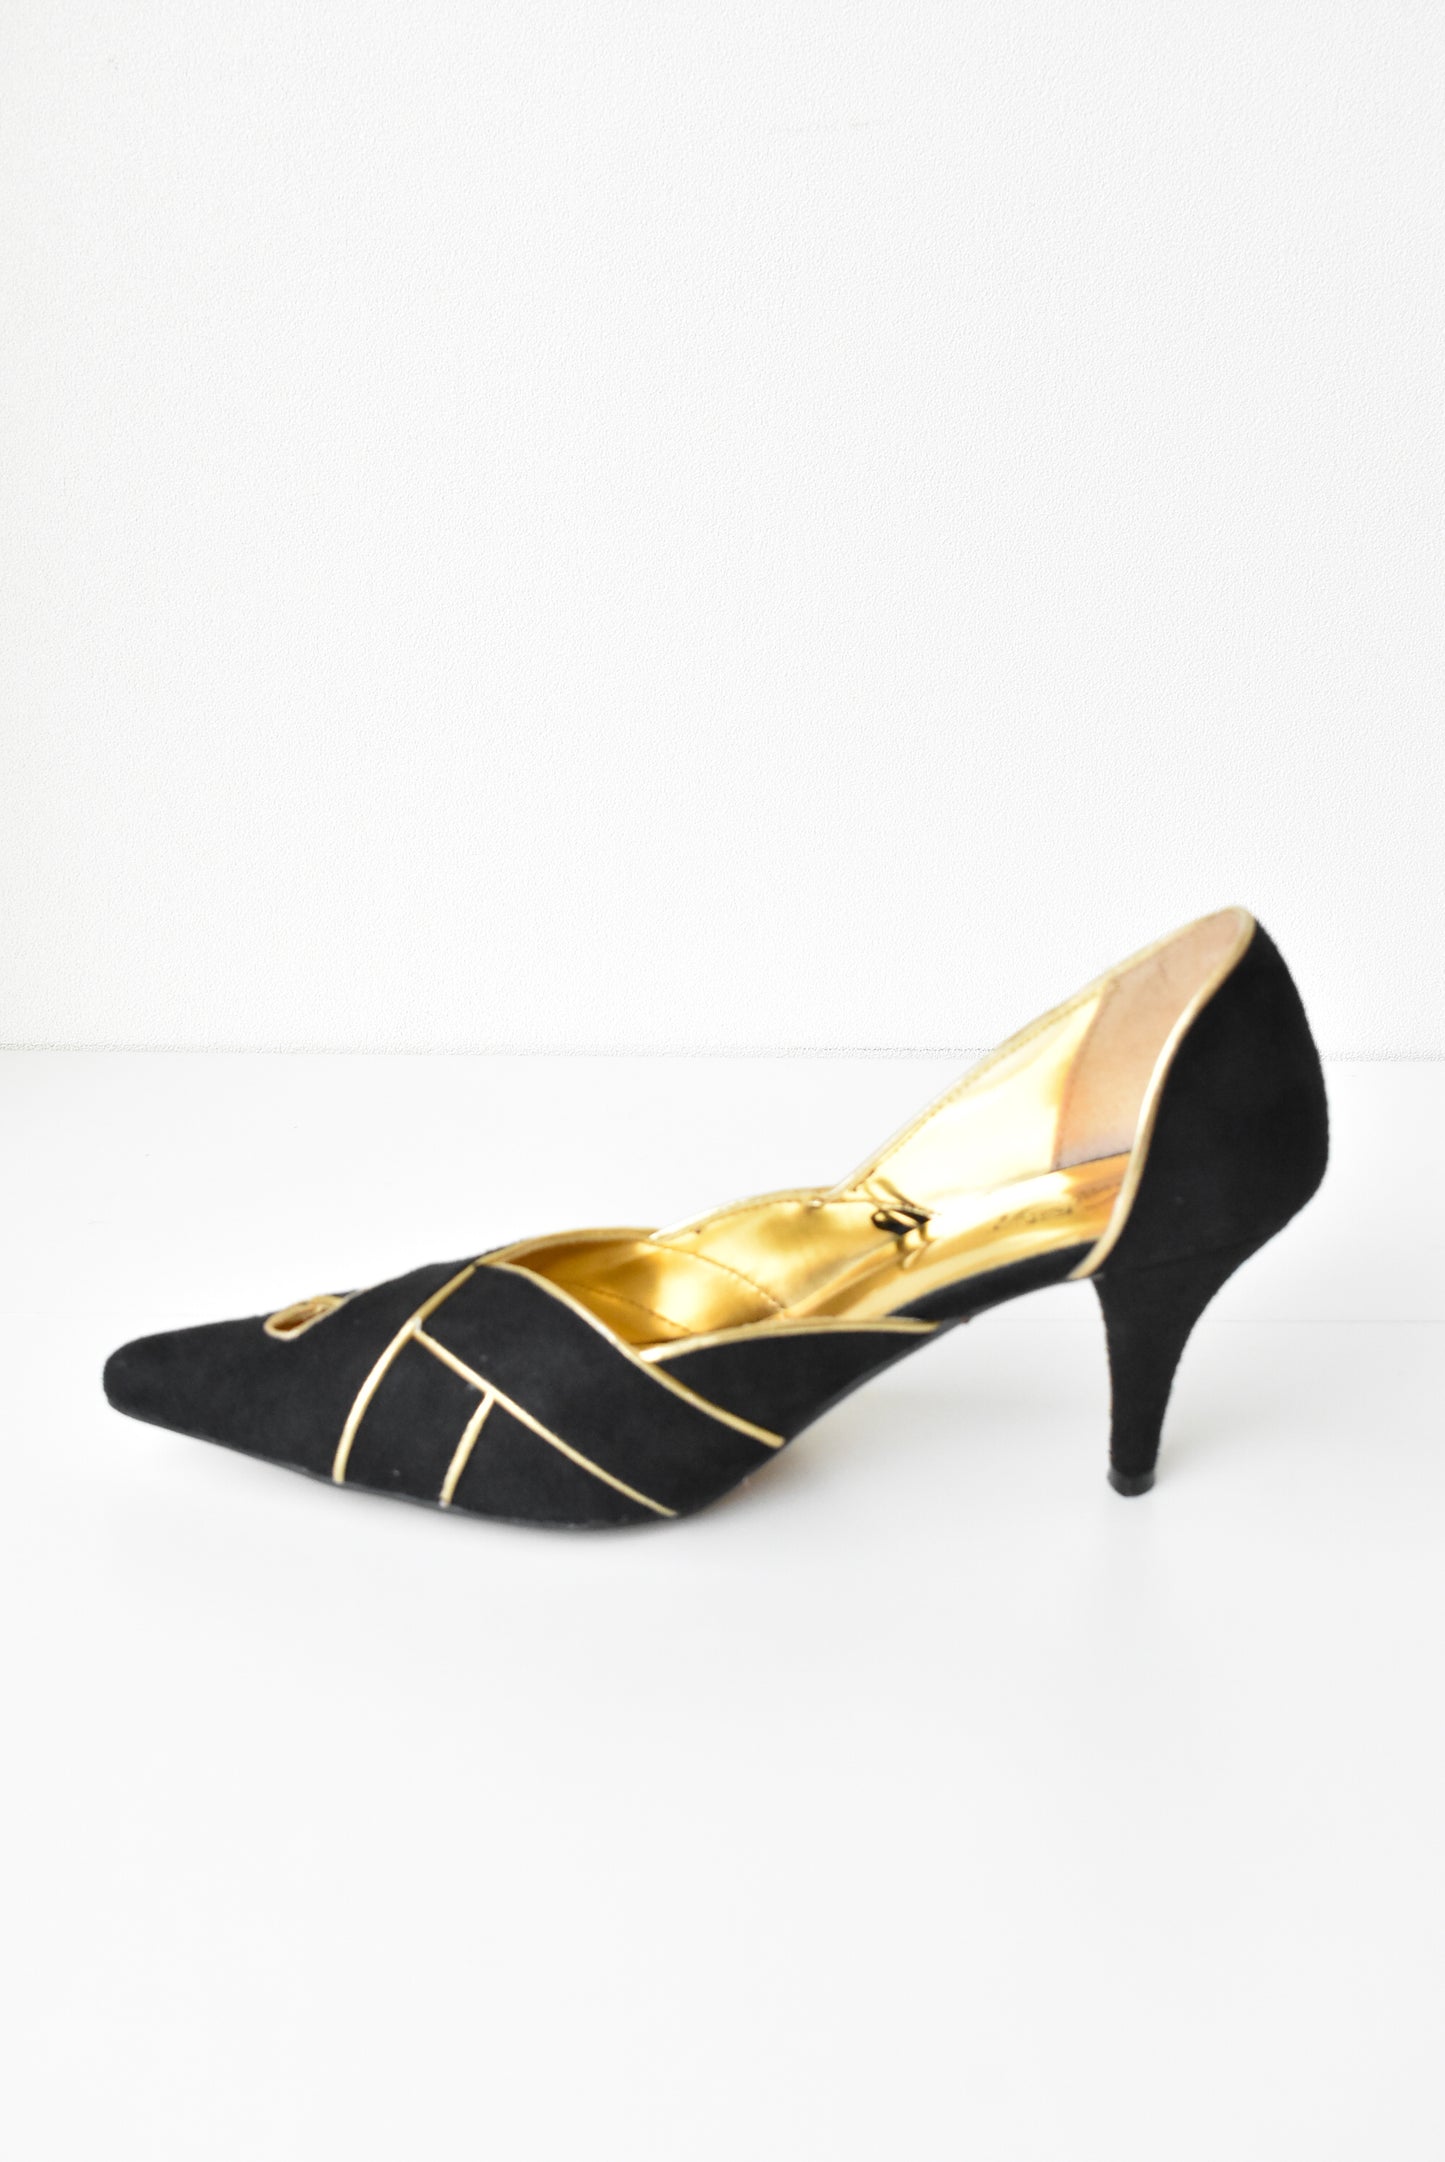 Wild Rose black and gold suede heels, size 8